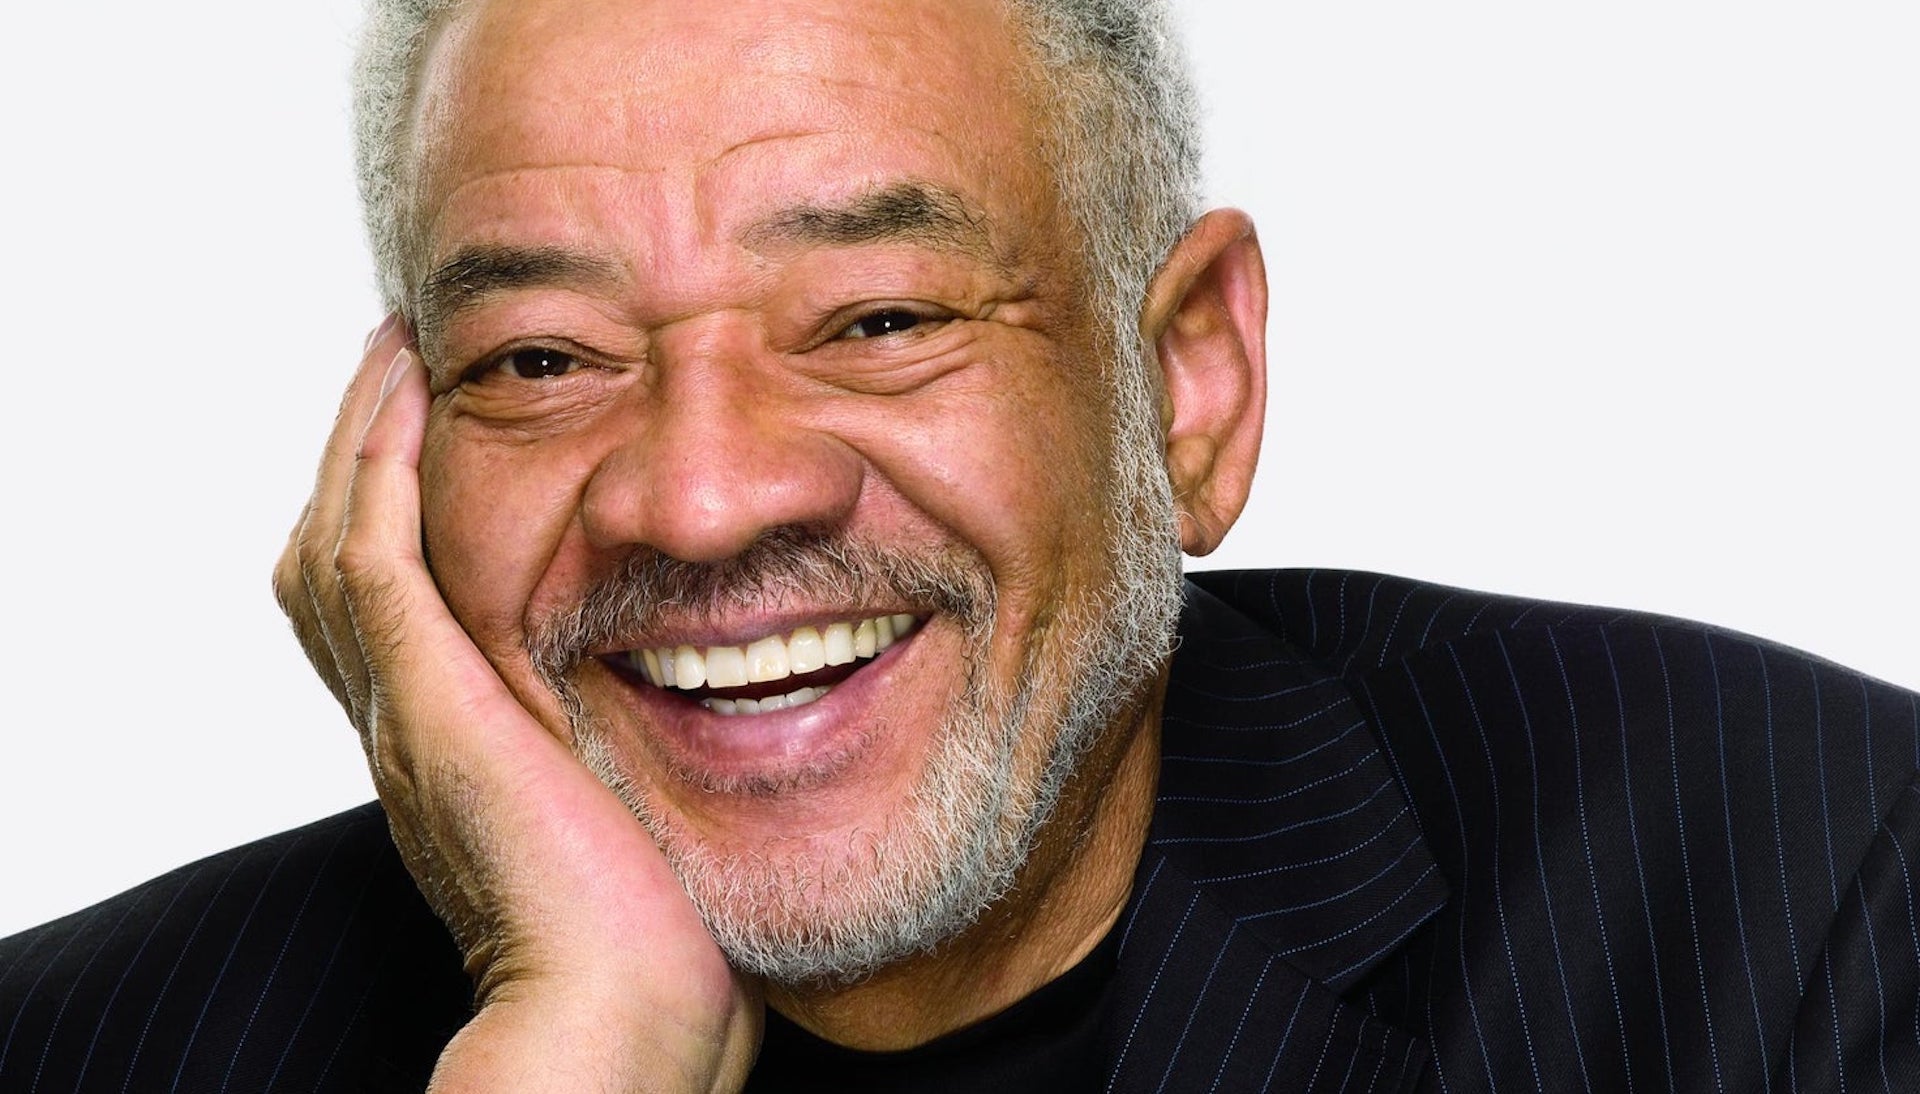 'Lean On Me' Singer Bill Withers Dead At 81